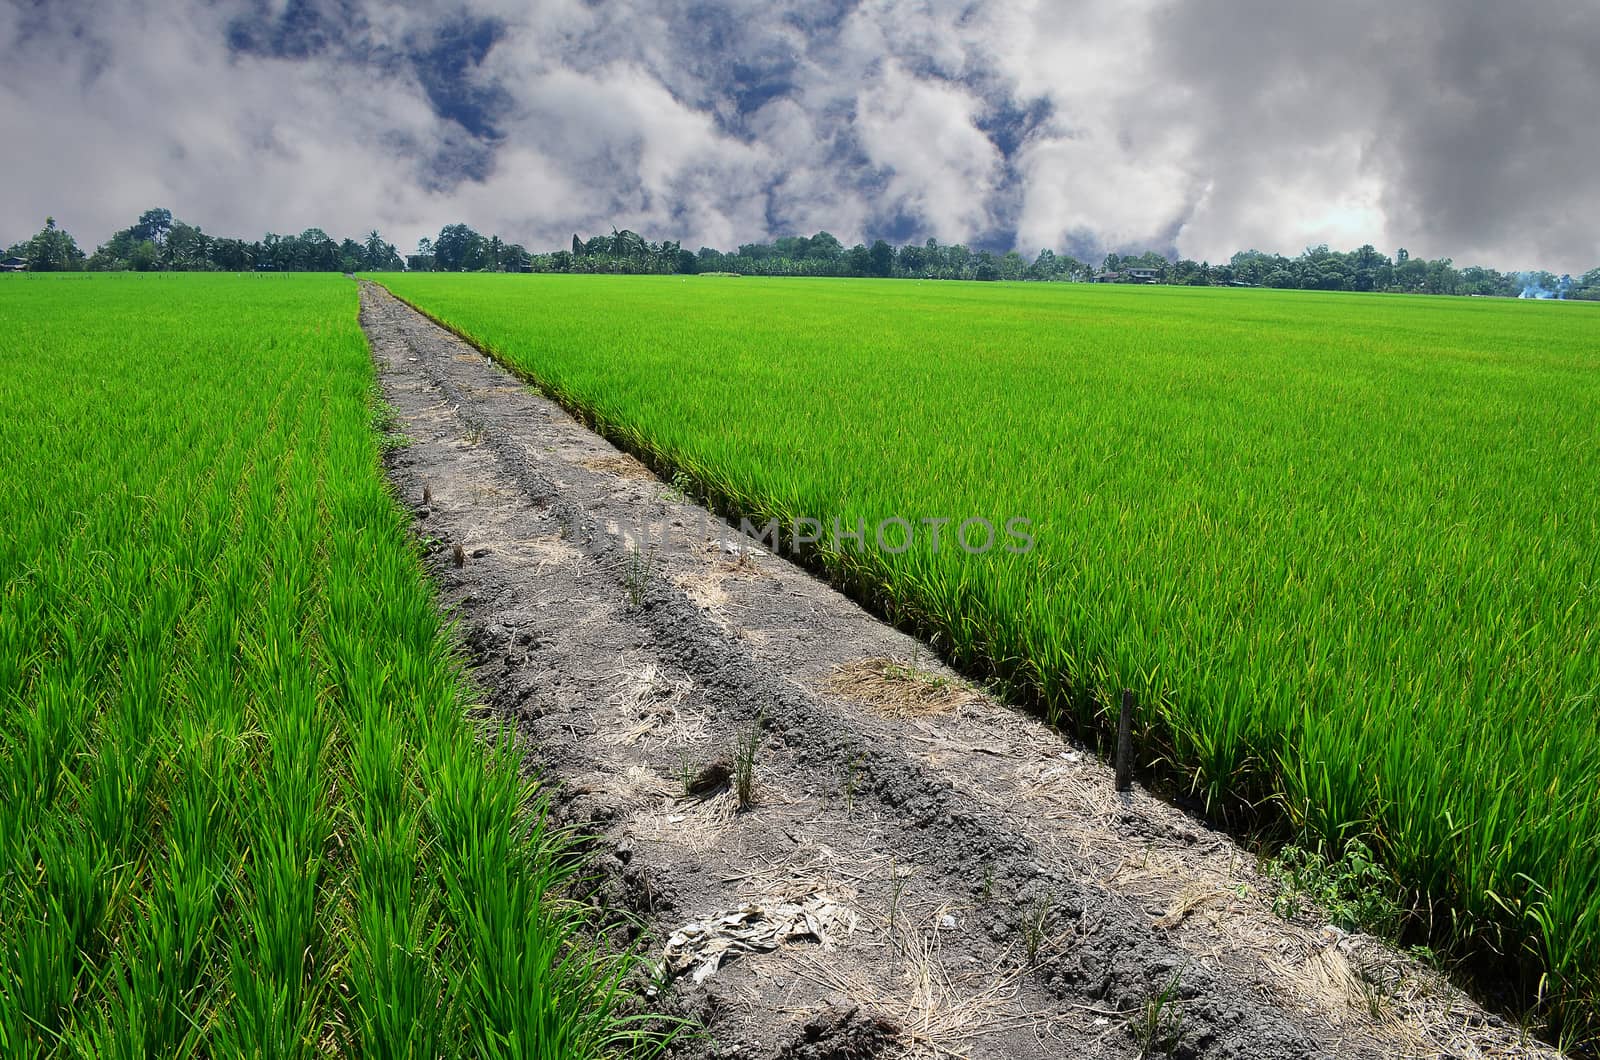 A Green Growing Rice Field in Countryside